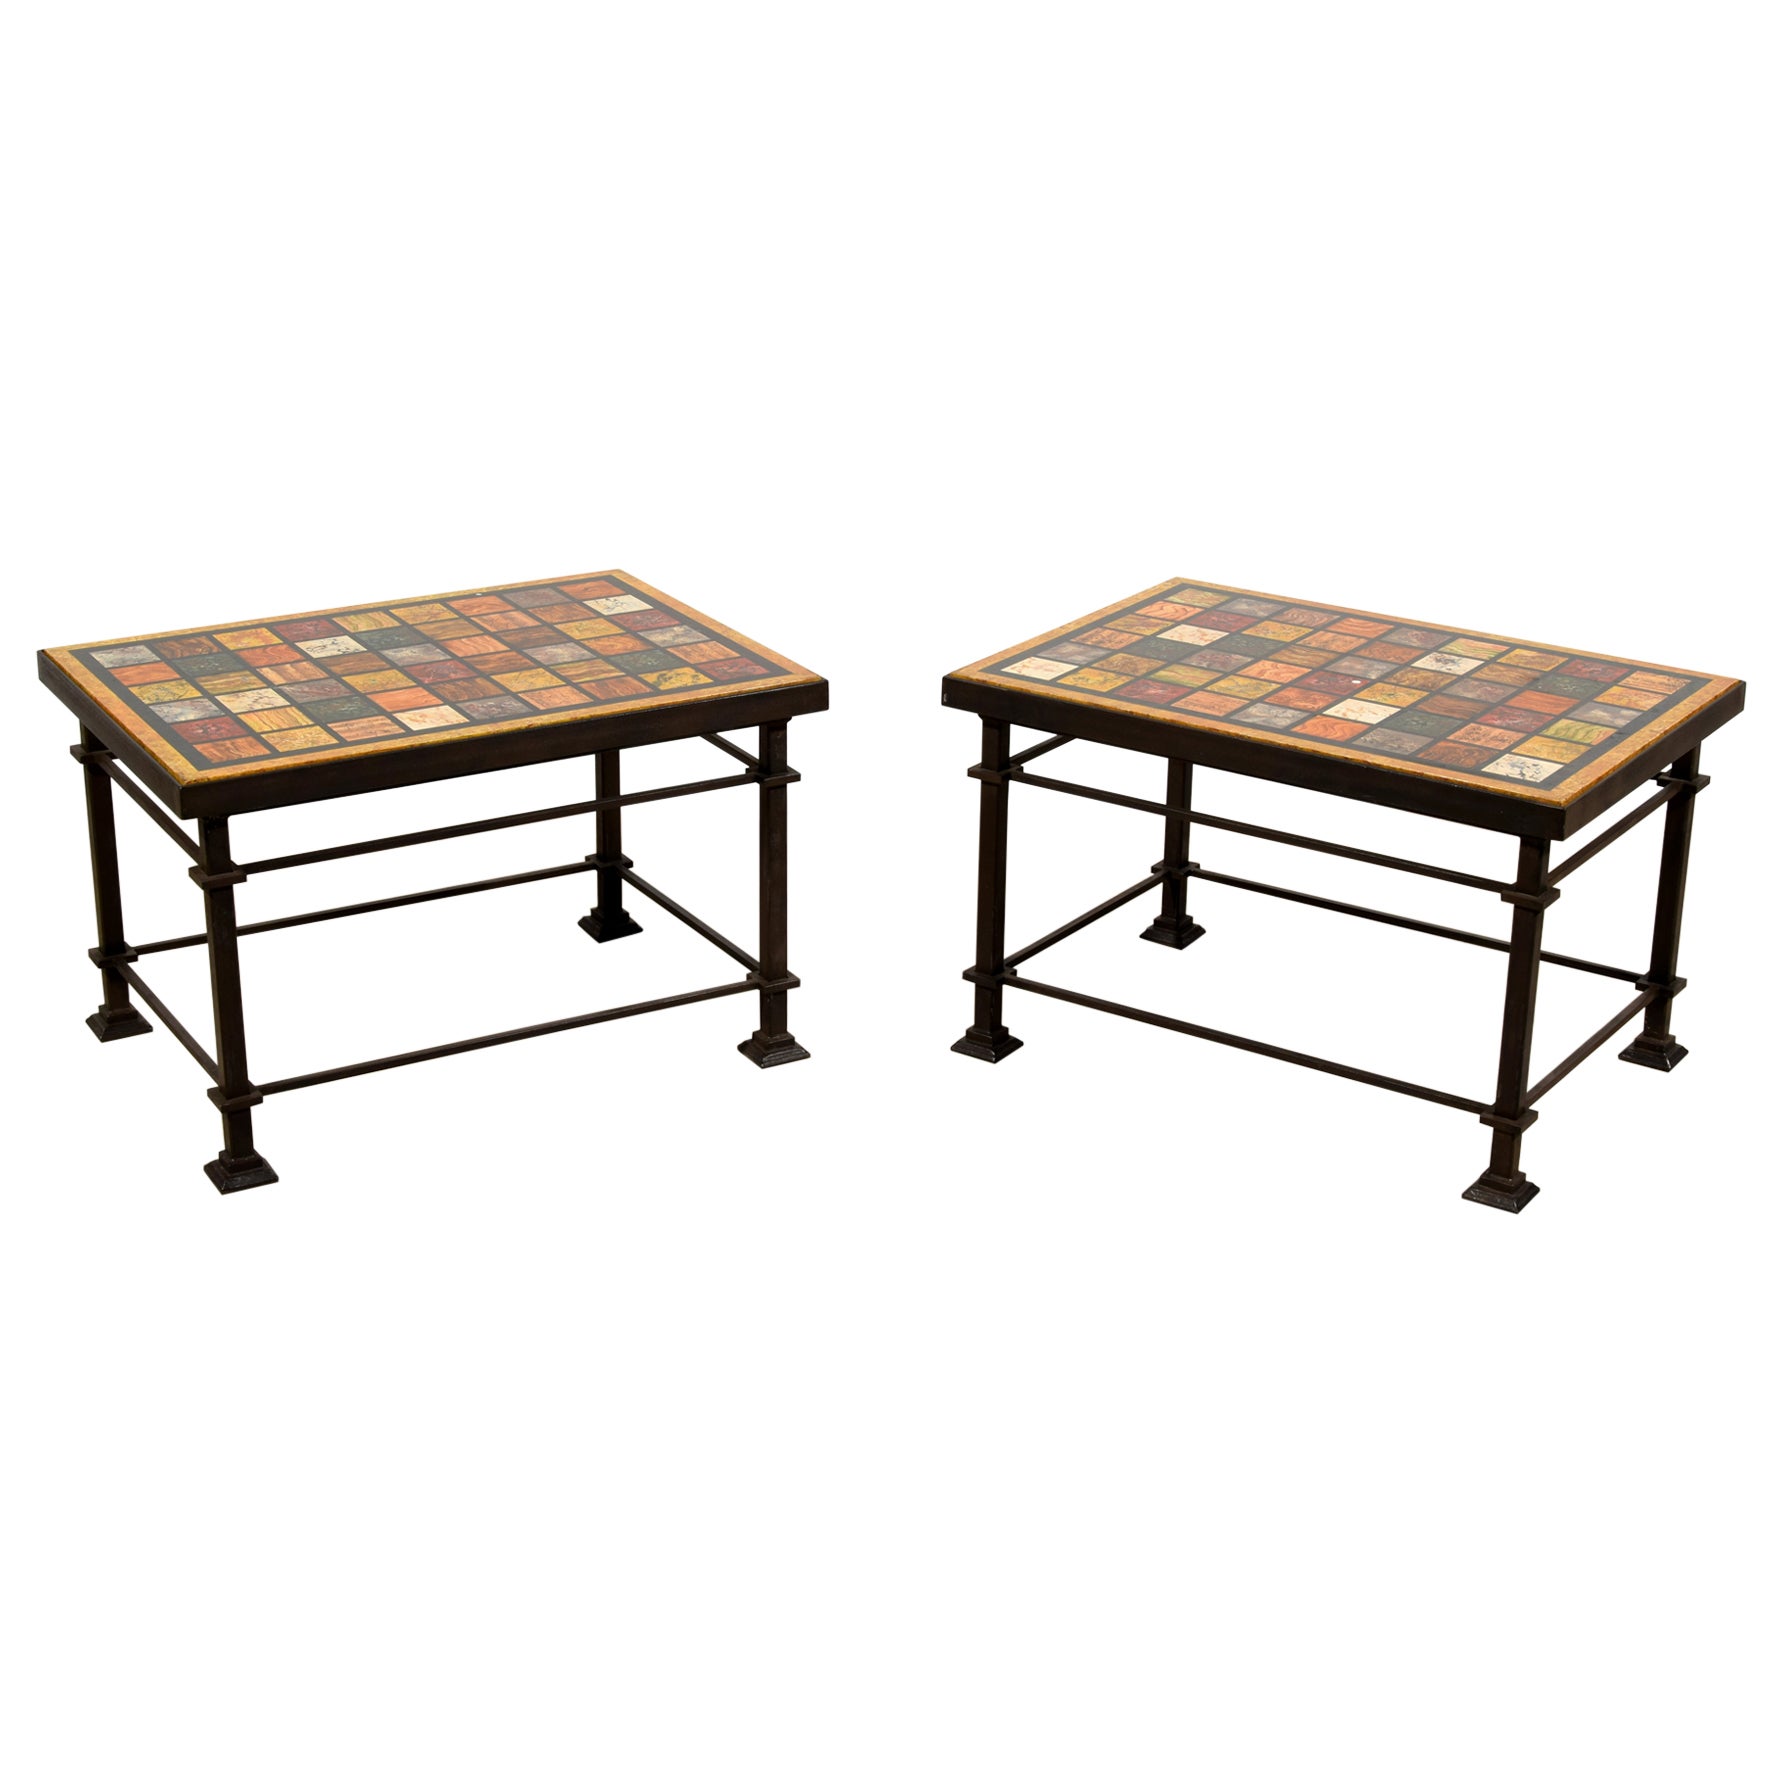 XXth Century, Pair of Roman Coffee Tables with Lacquered Wood Top For Sale